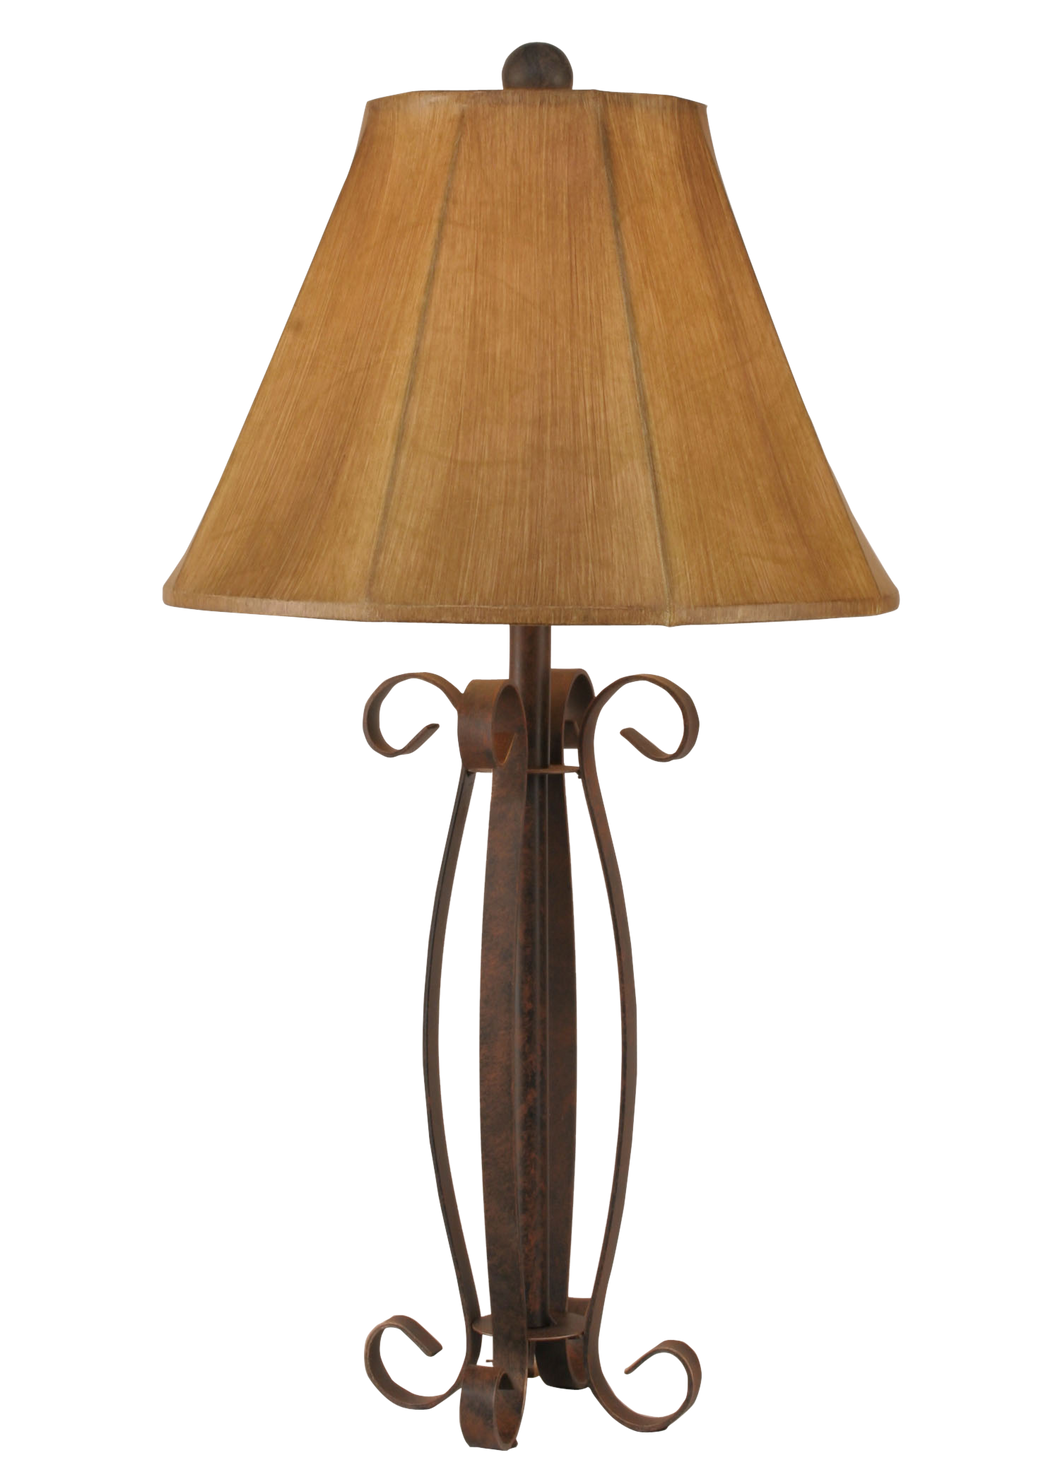 Rust Iron 4 Curls Accent Lamp w/ Faux Leather Shade